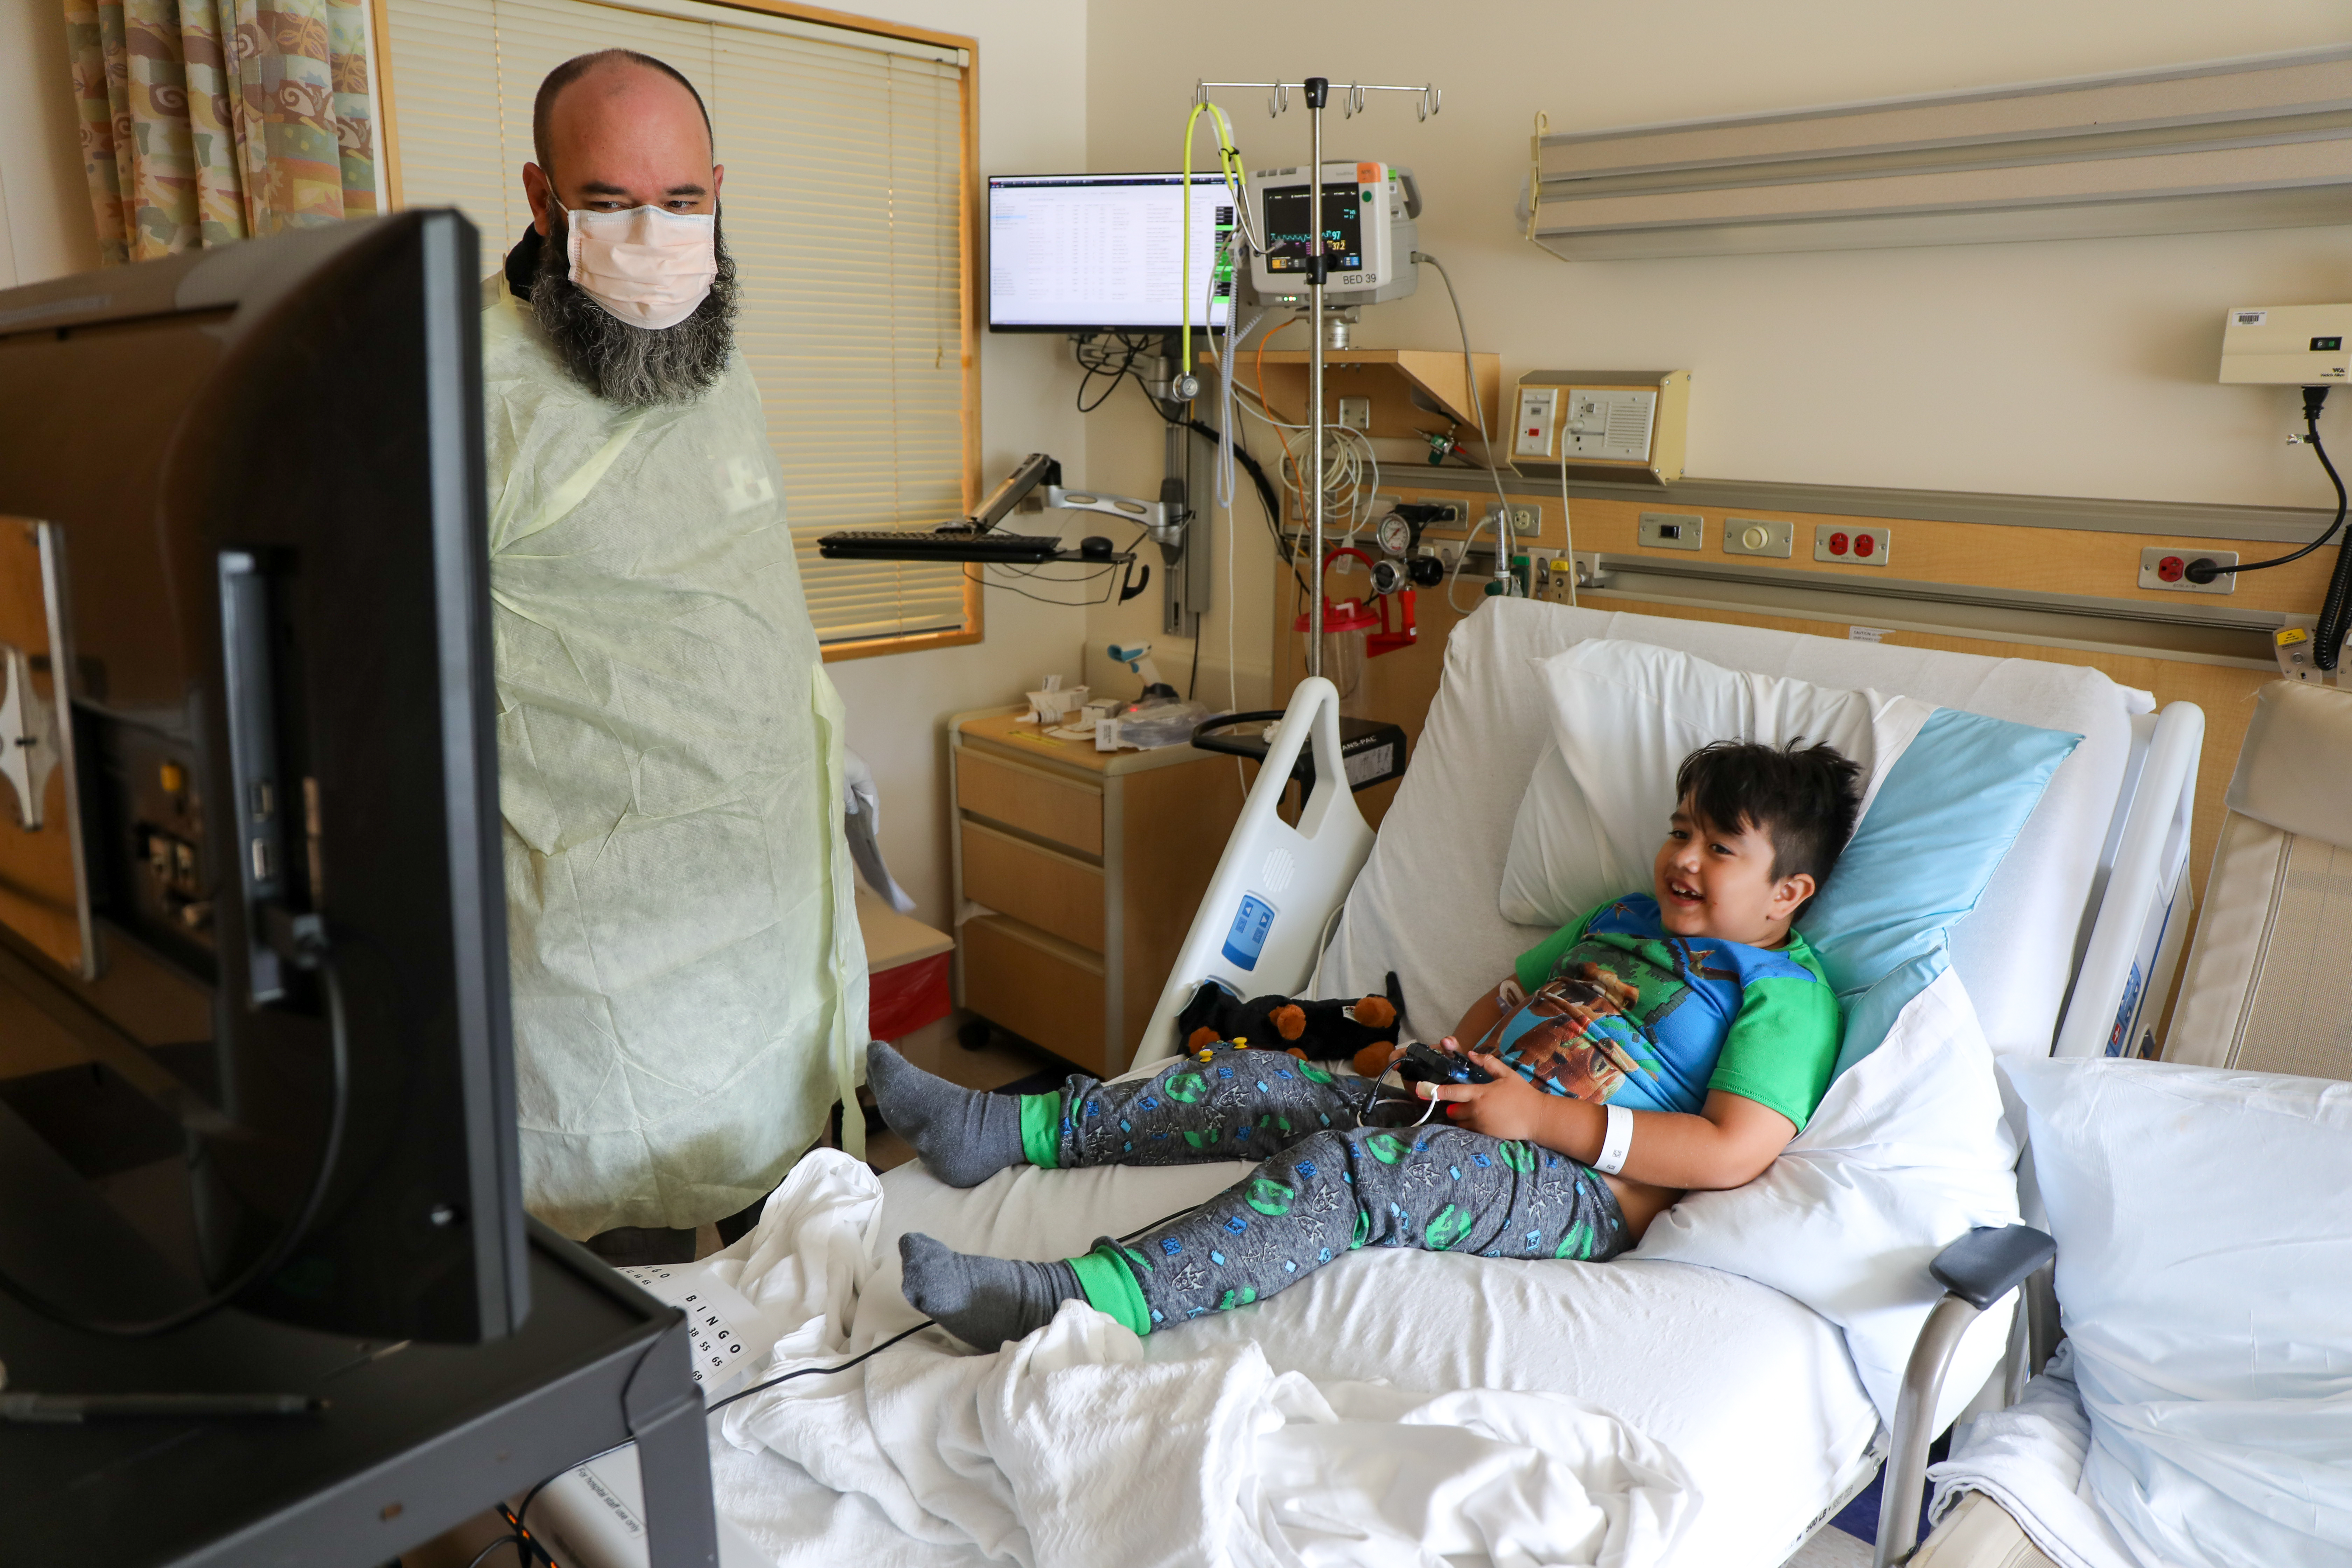 Video games at OHSU help kids cope during medical treatment - OPB